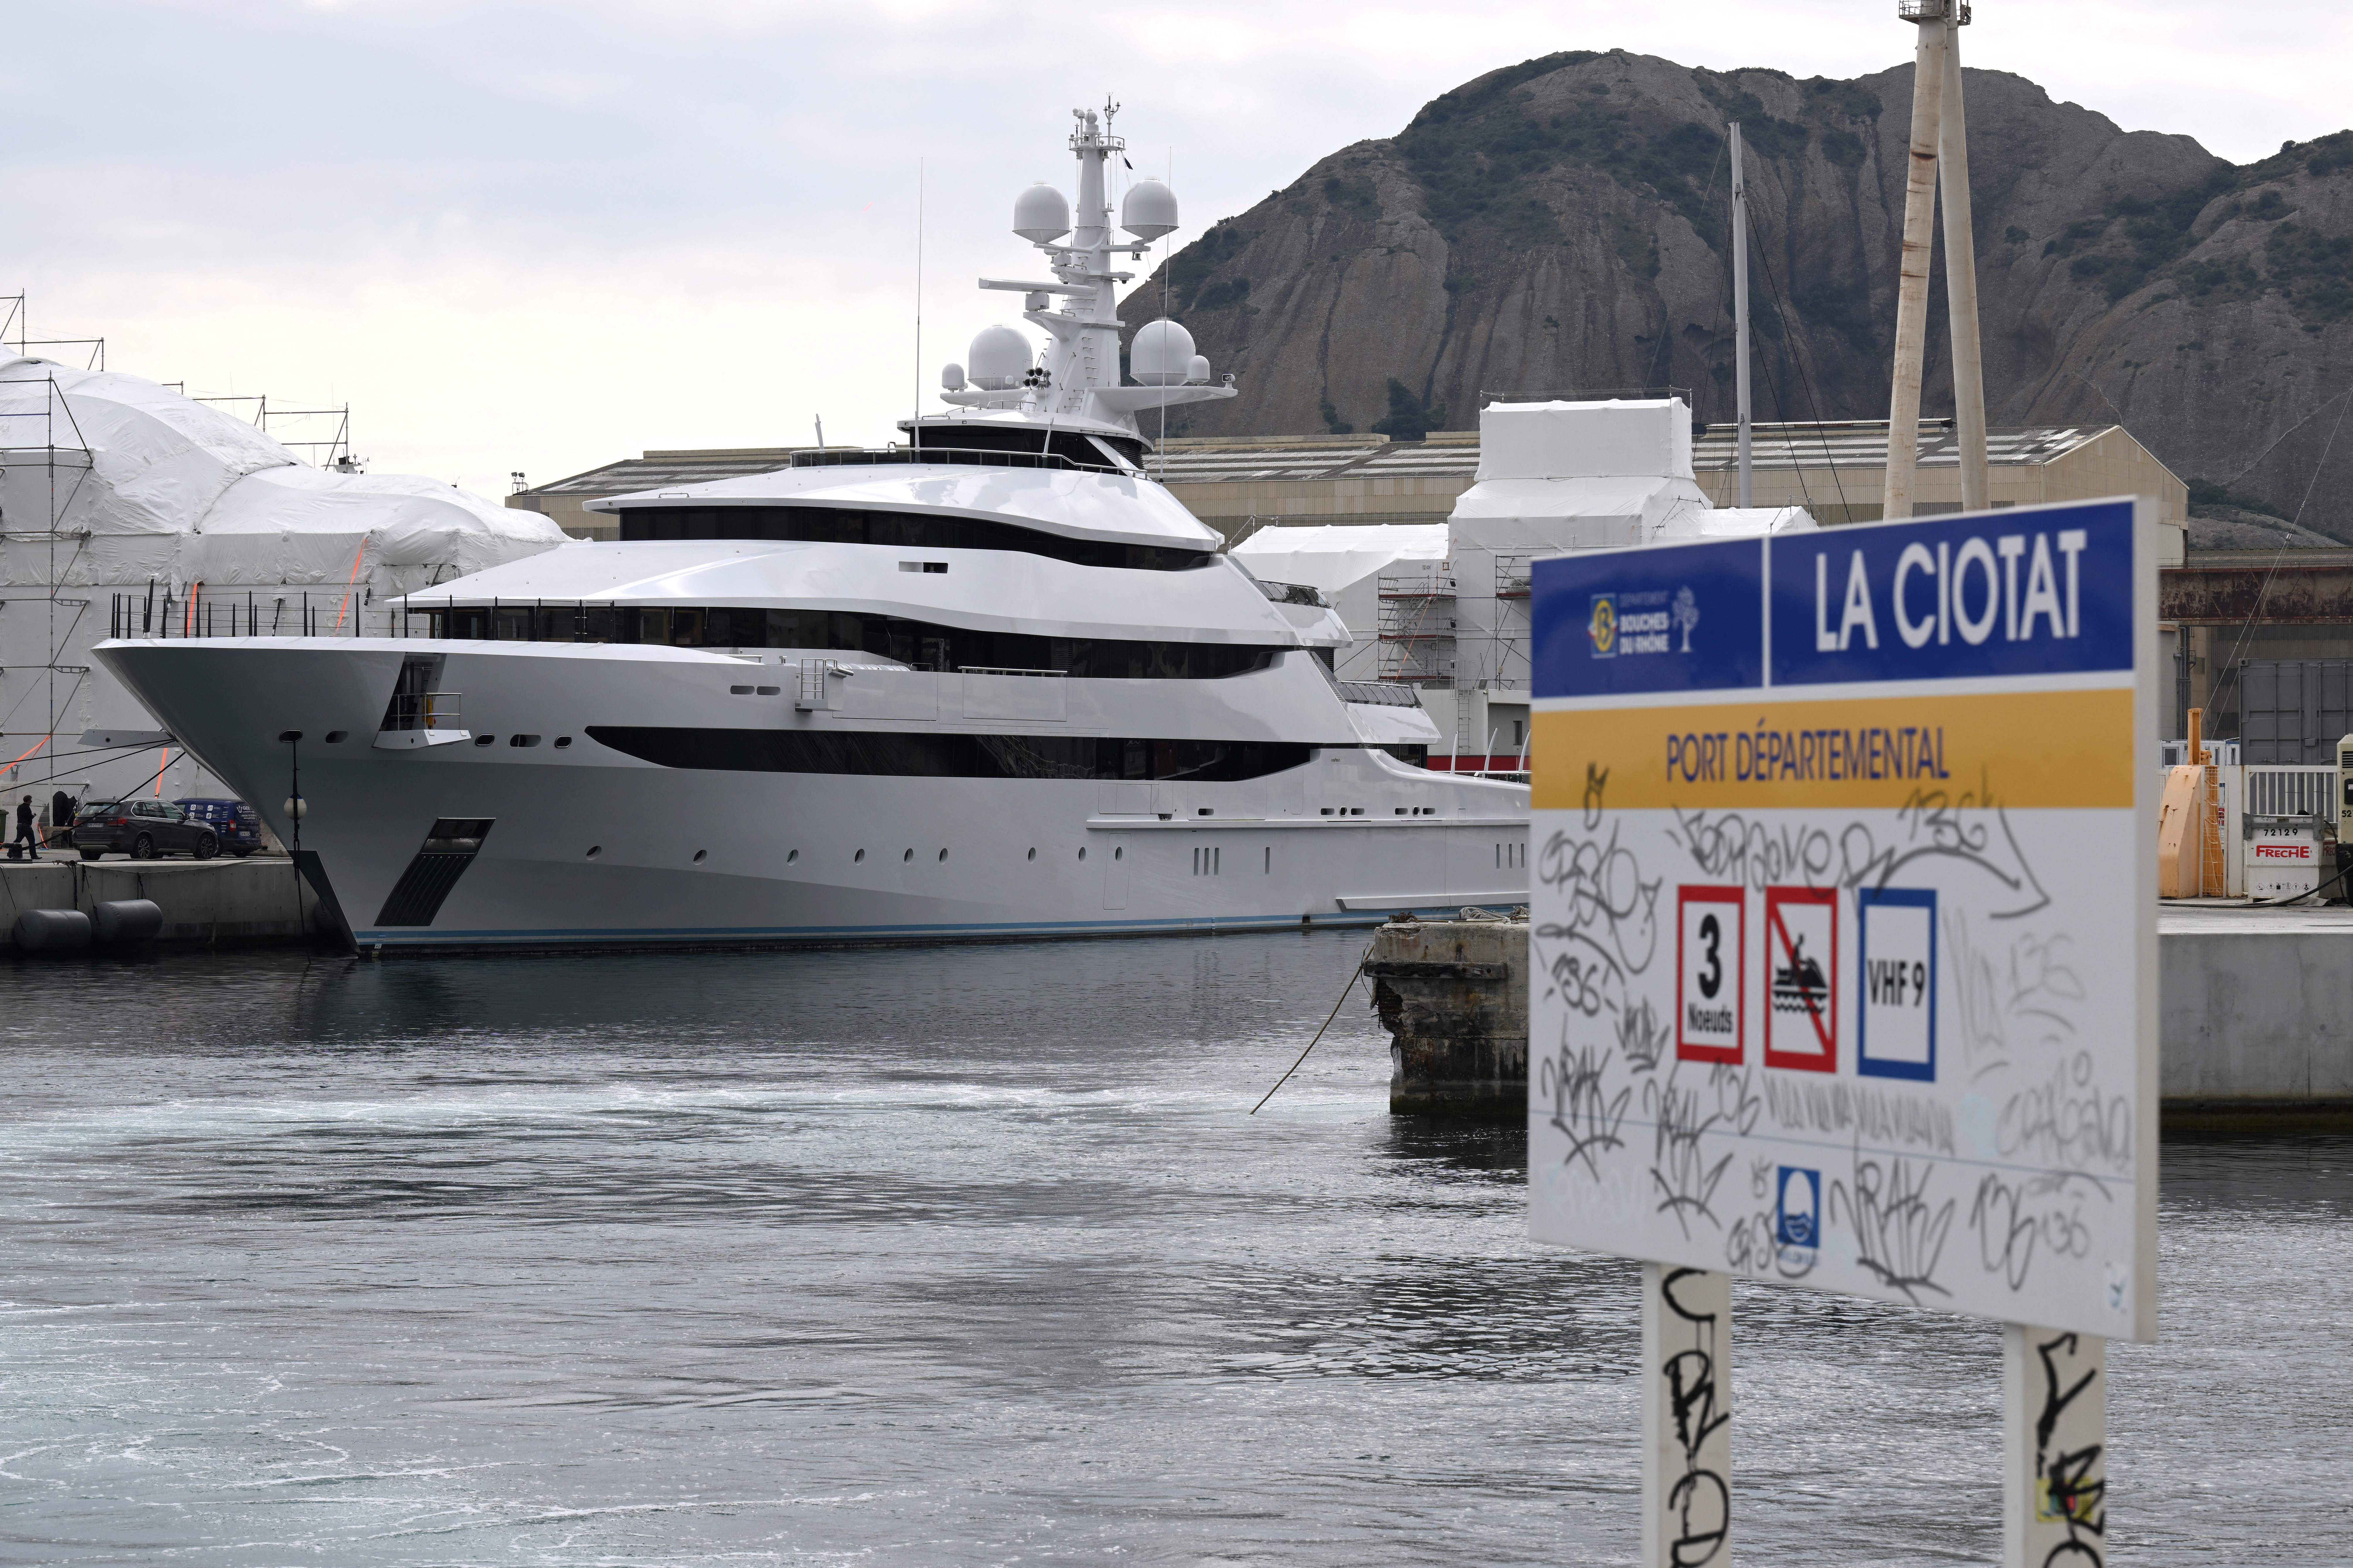 The Amore Vero yacht in a shipyard near Marseille, southern France, on March 3.